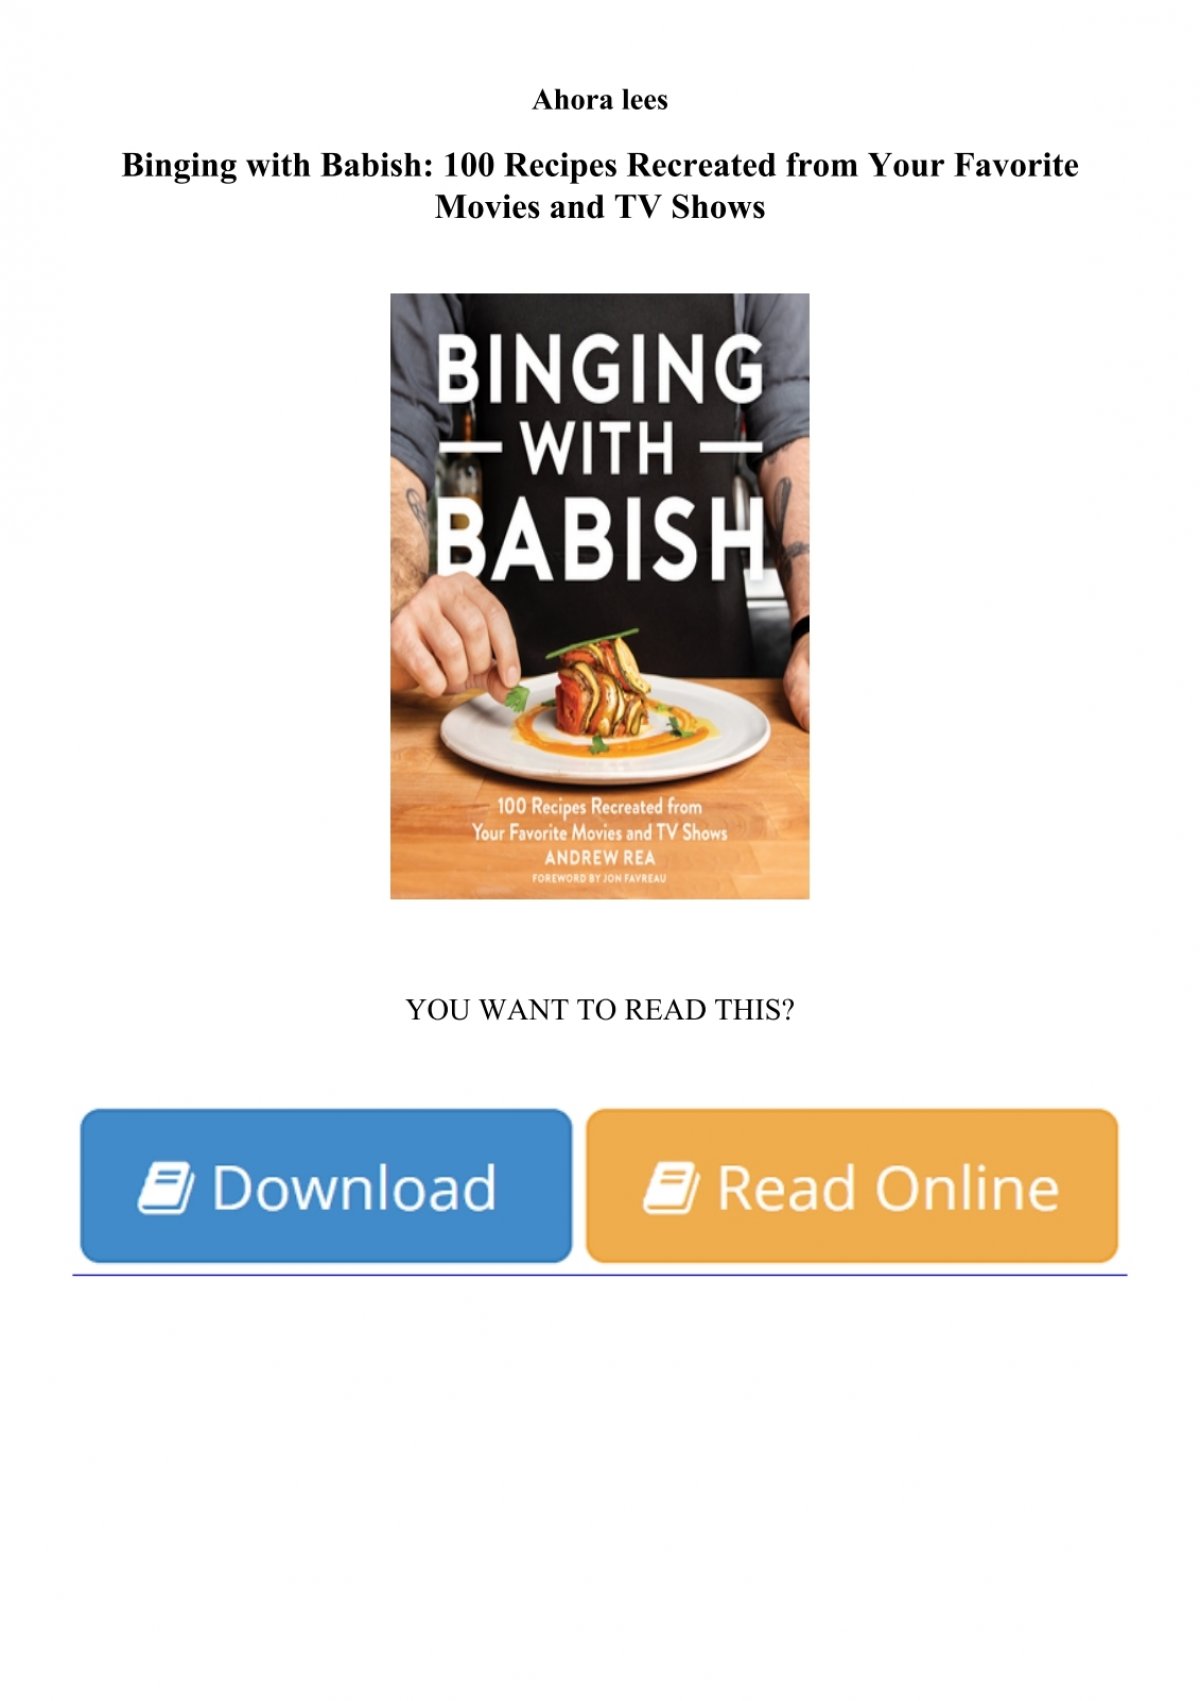 Binging With Babish Book Recipe List : The Best Video Game Cookbooks